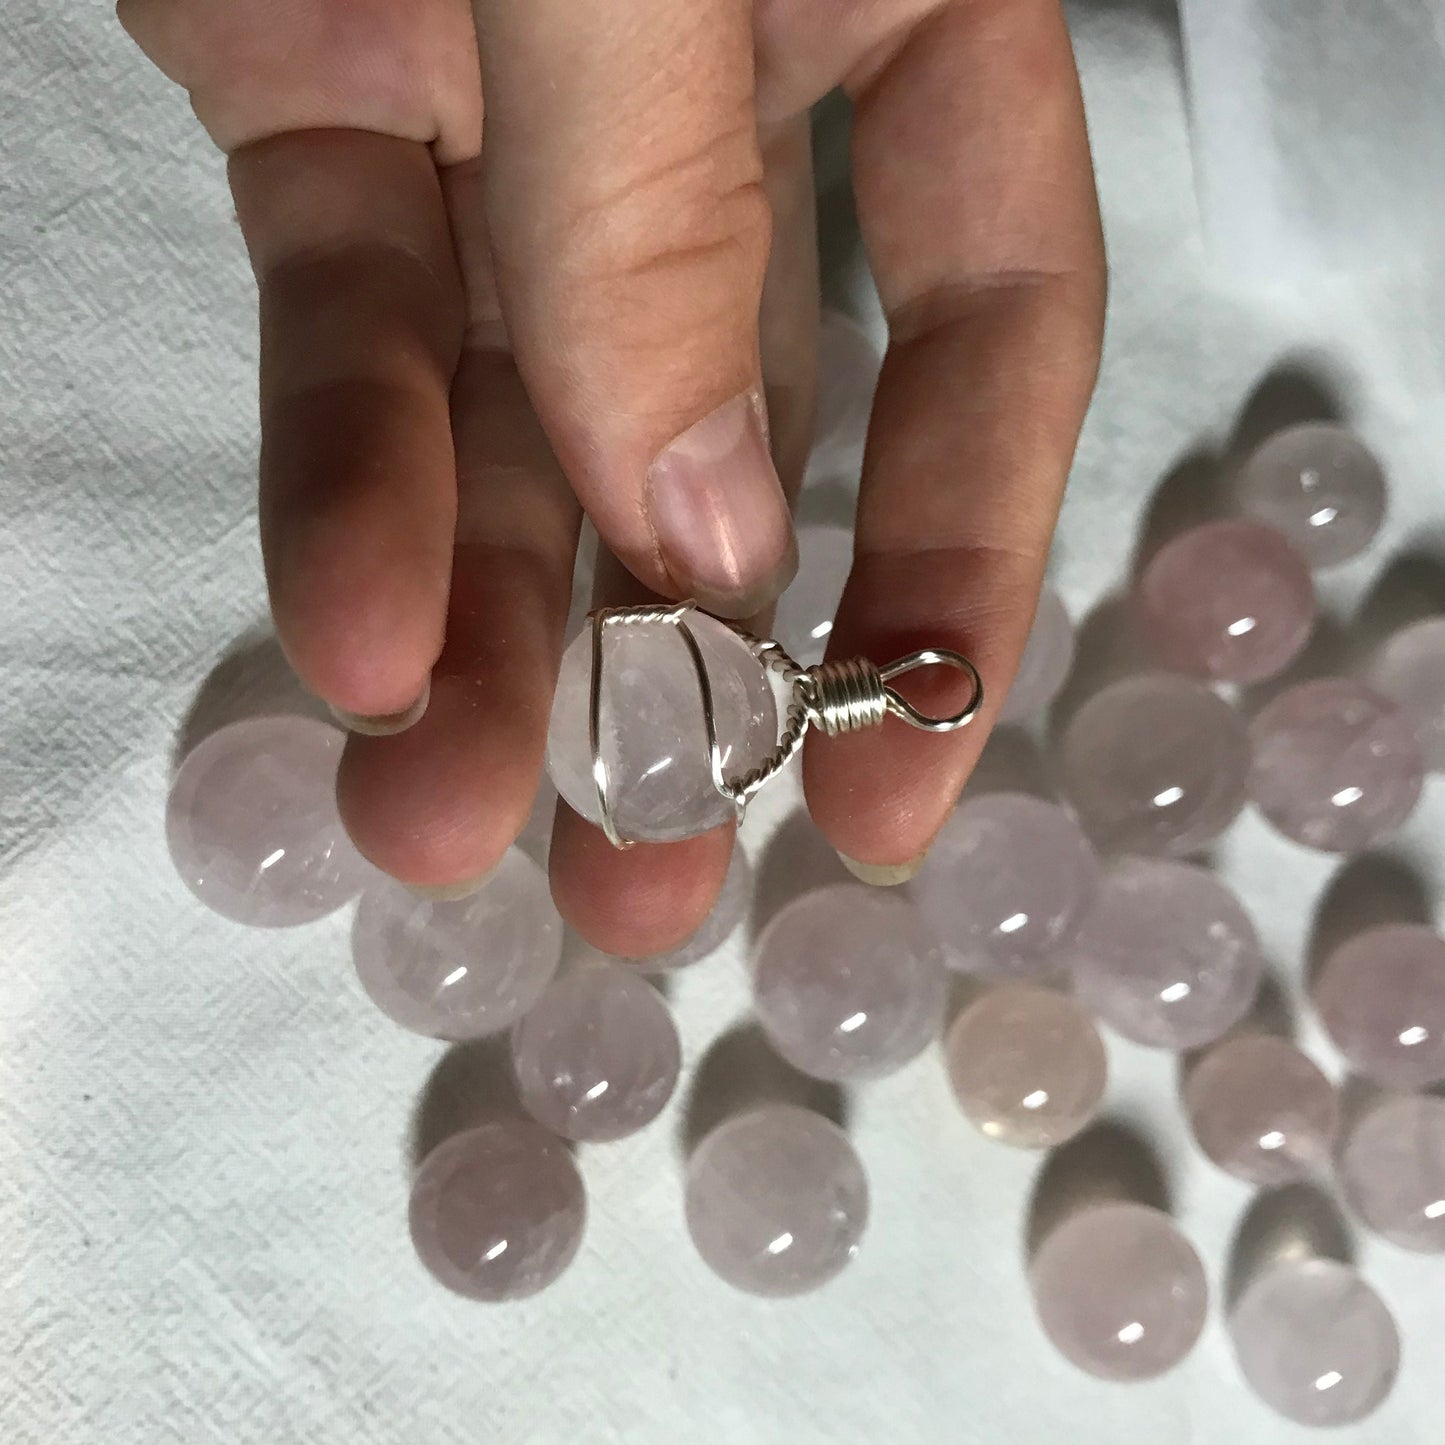 Rose Quartz, Polished Crystal Spheres (Approx. 1/2") Polished Stone for the Heart Chakra, for Wire Wrapping or Crystal Grid Supply 0316